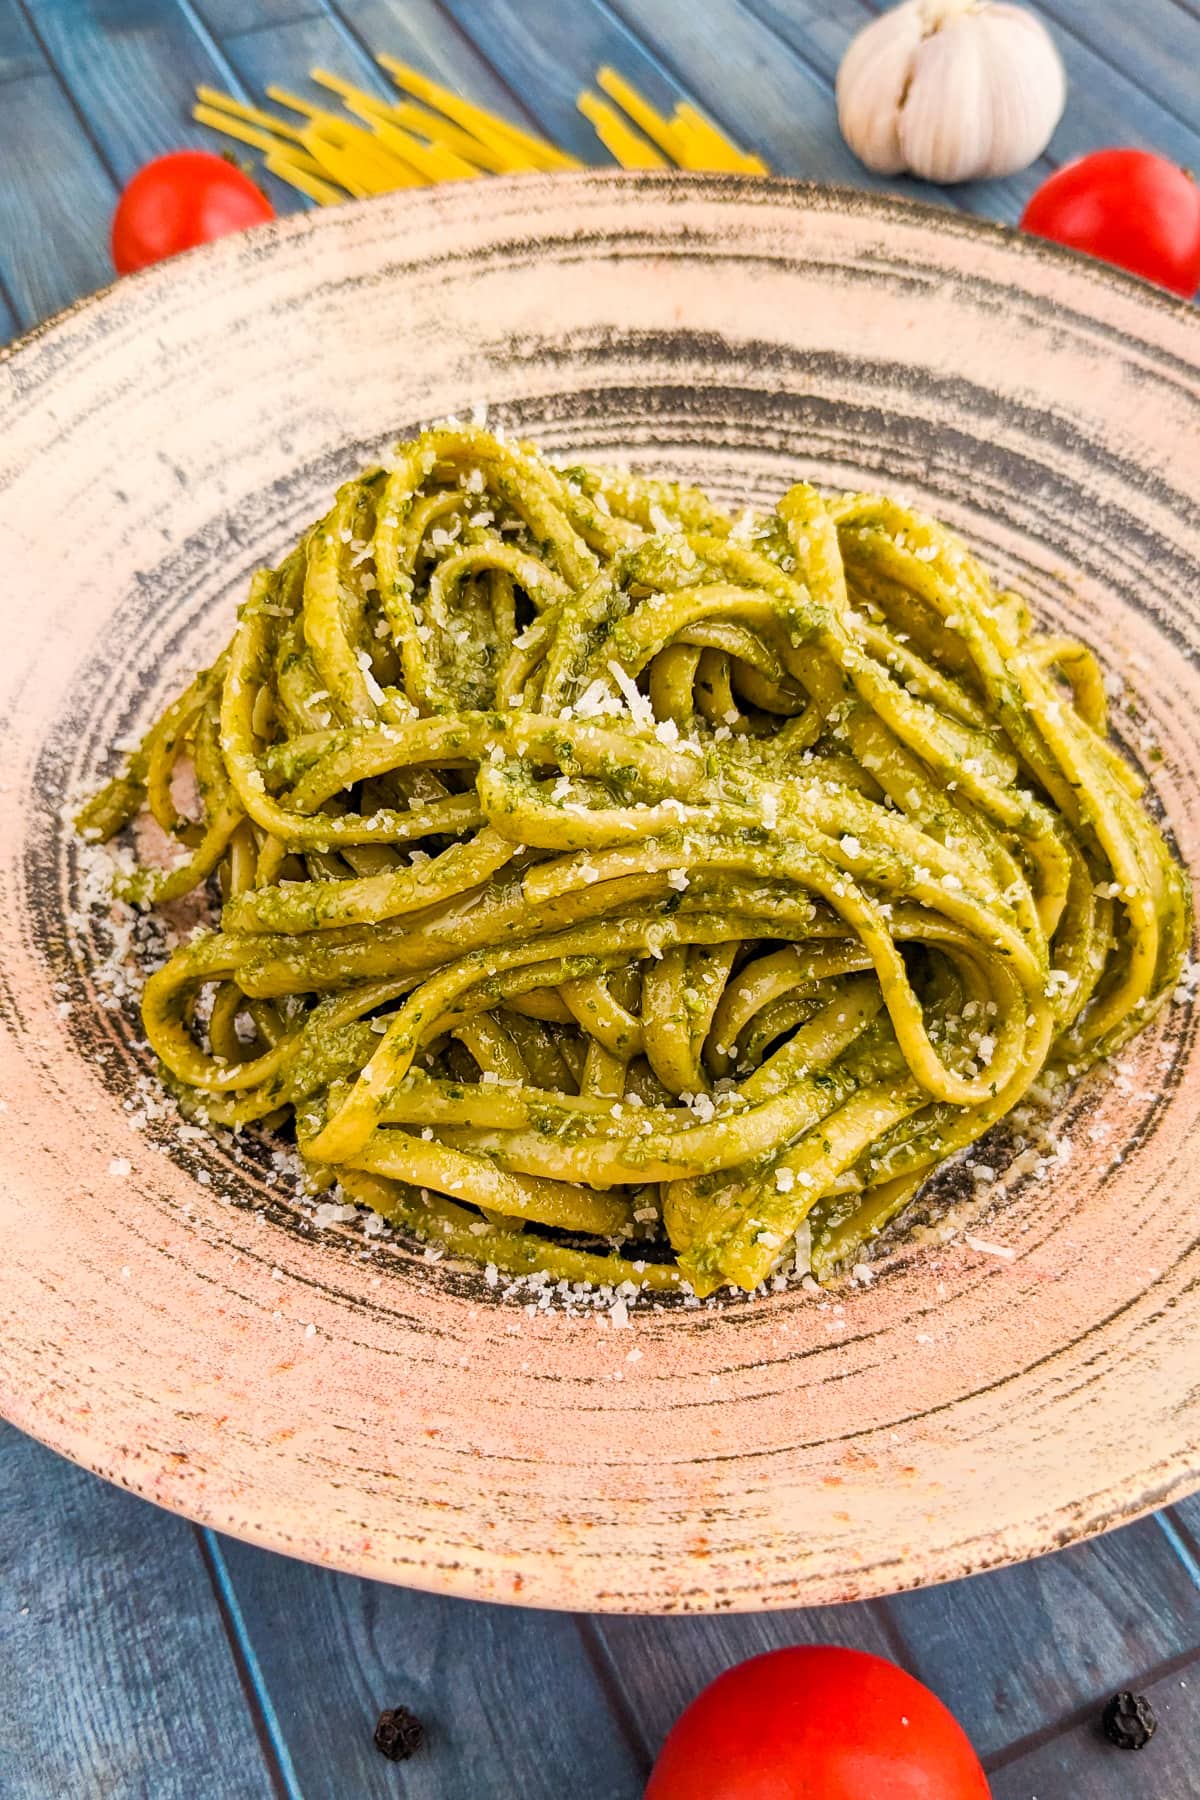 A vintage plate full of spaghetti with pesto near fresh tomatoes, and garlic.